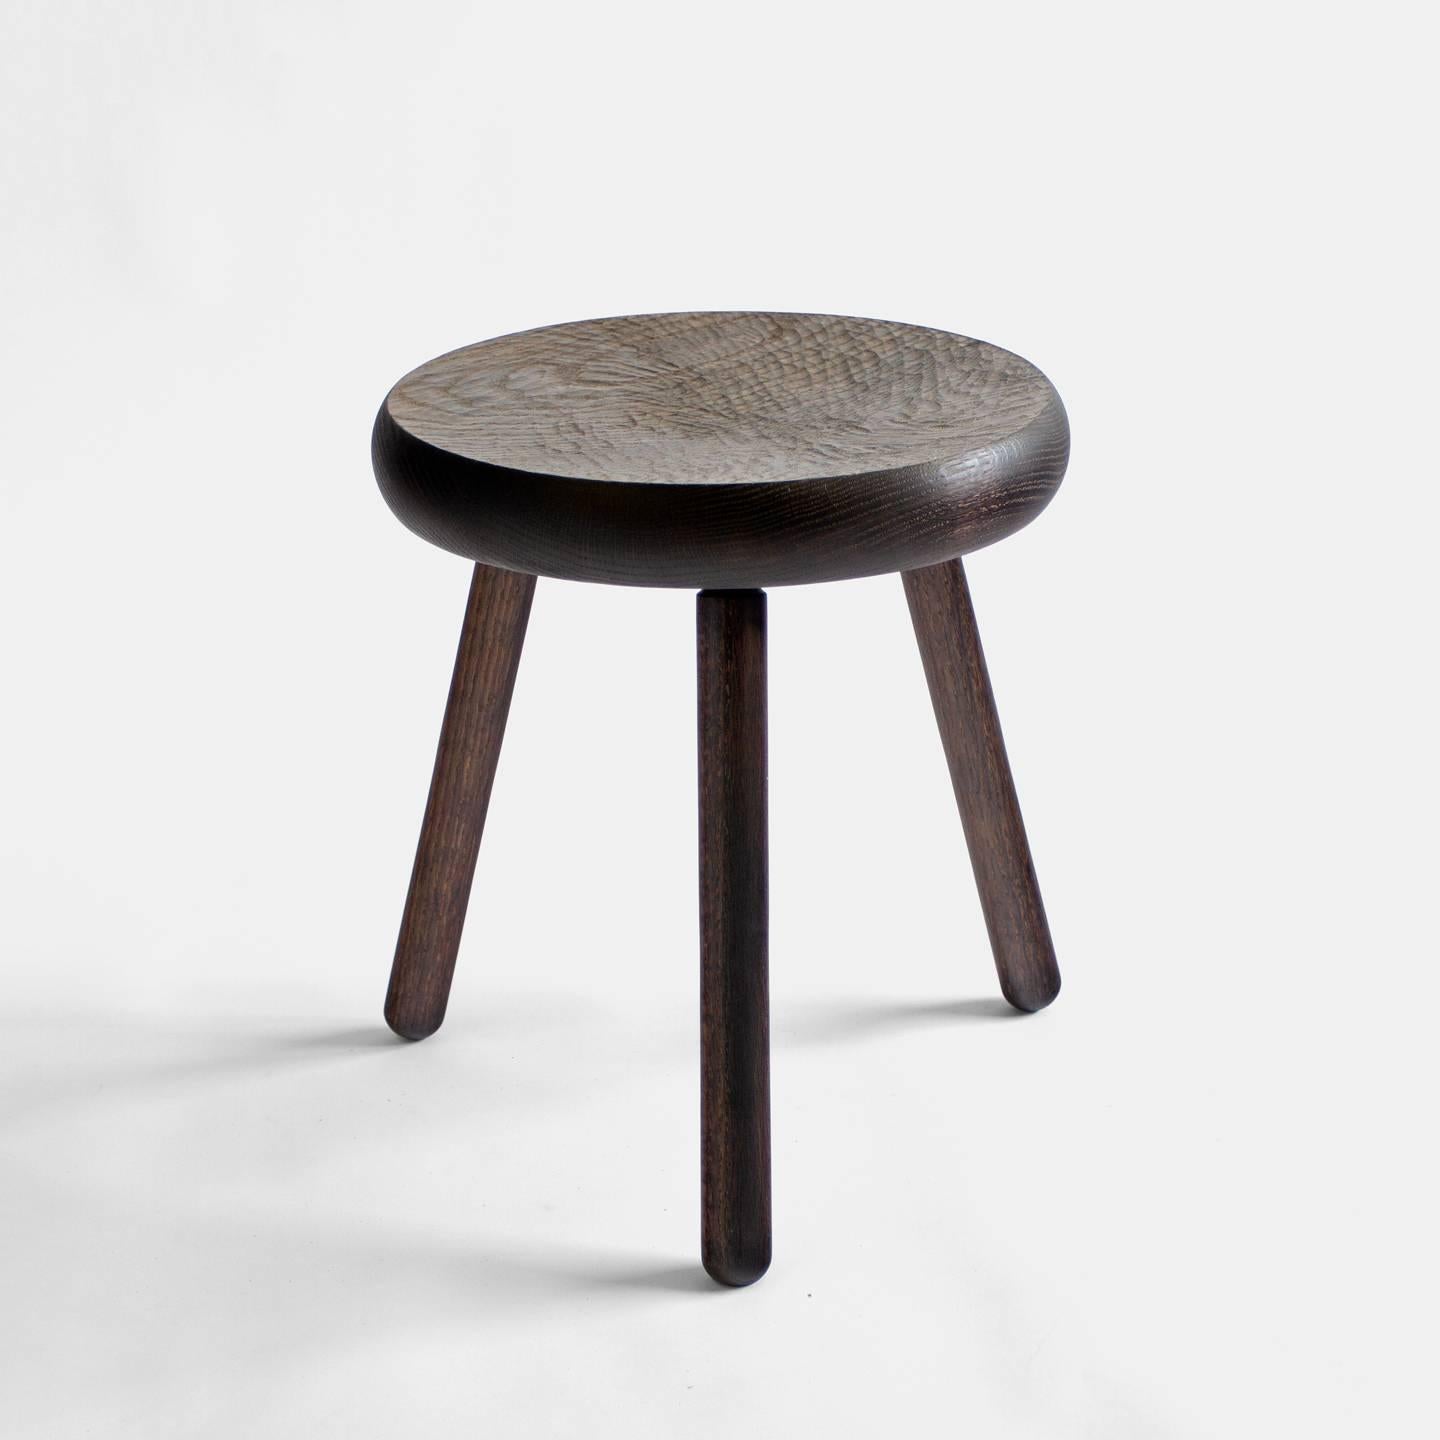 A versatile piece of furniture, the Dibbet stool functions as seating, an ottoman, or a side table. Reminiscent of shaker or early frontier furniture. The thick seat is hand-carved with a slight concave that leaves a tactile and smooth texture. The